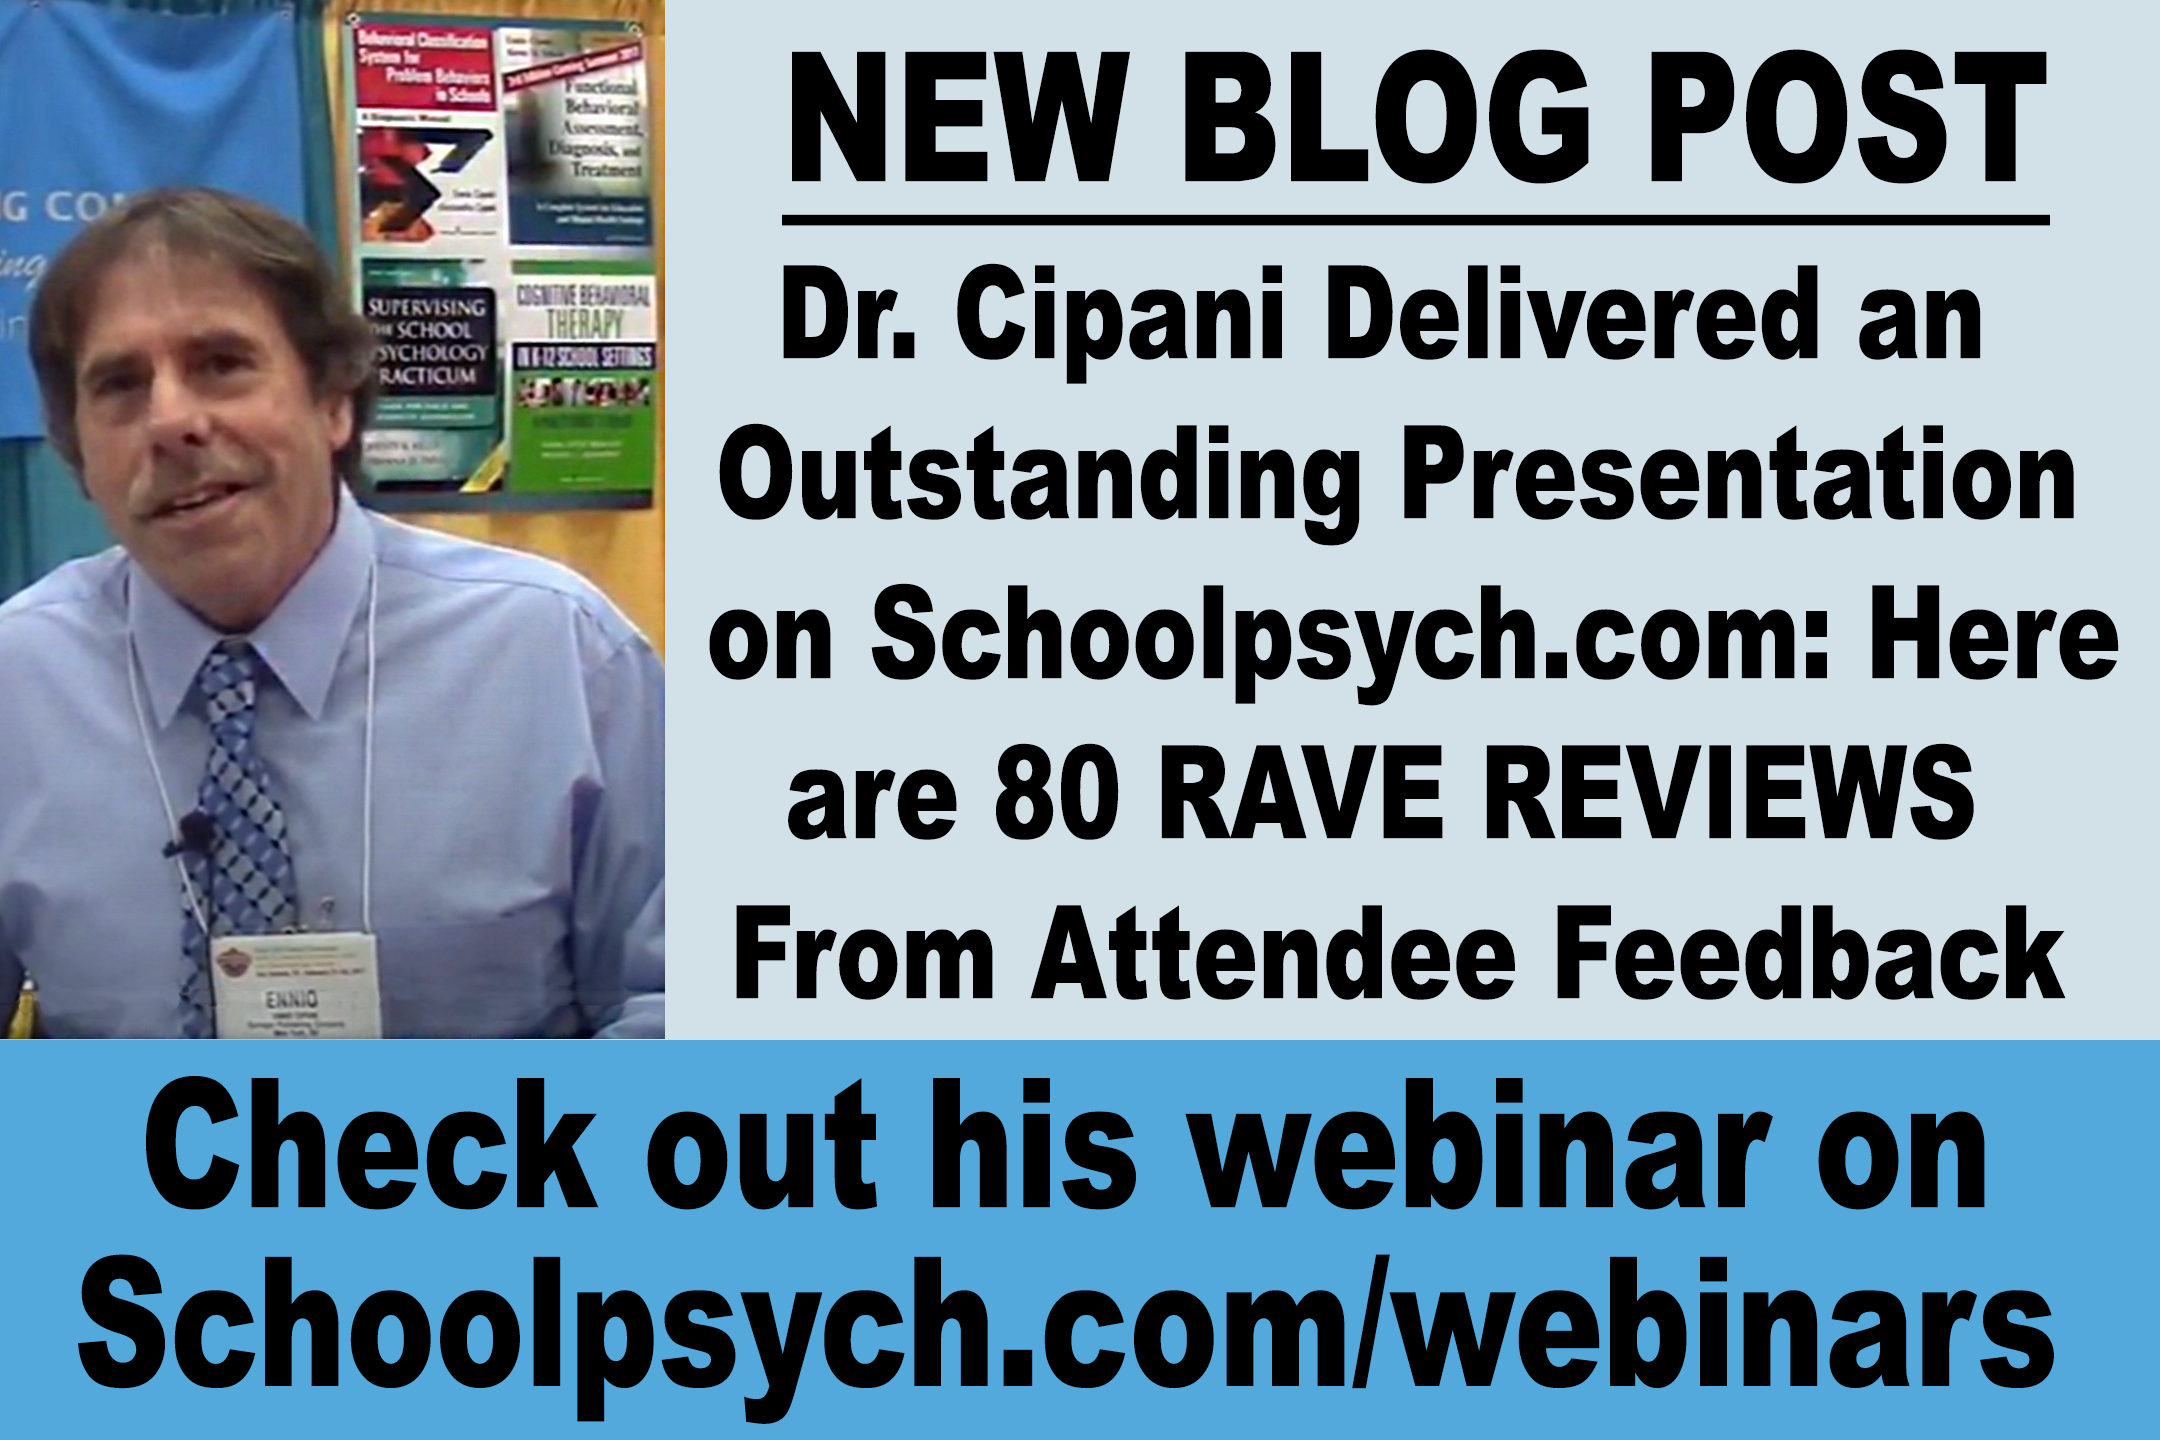 Dr. Cipani Delivered an OUTSTANDING Presentation on Schoolpsych.com: Here are 80 RAVE REVIEWS From Attendee Feedback